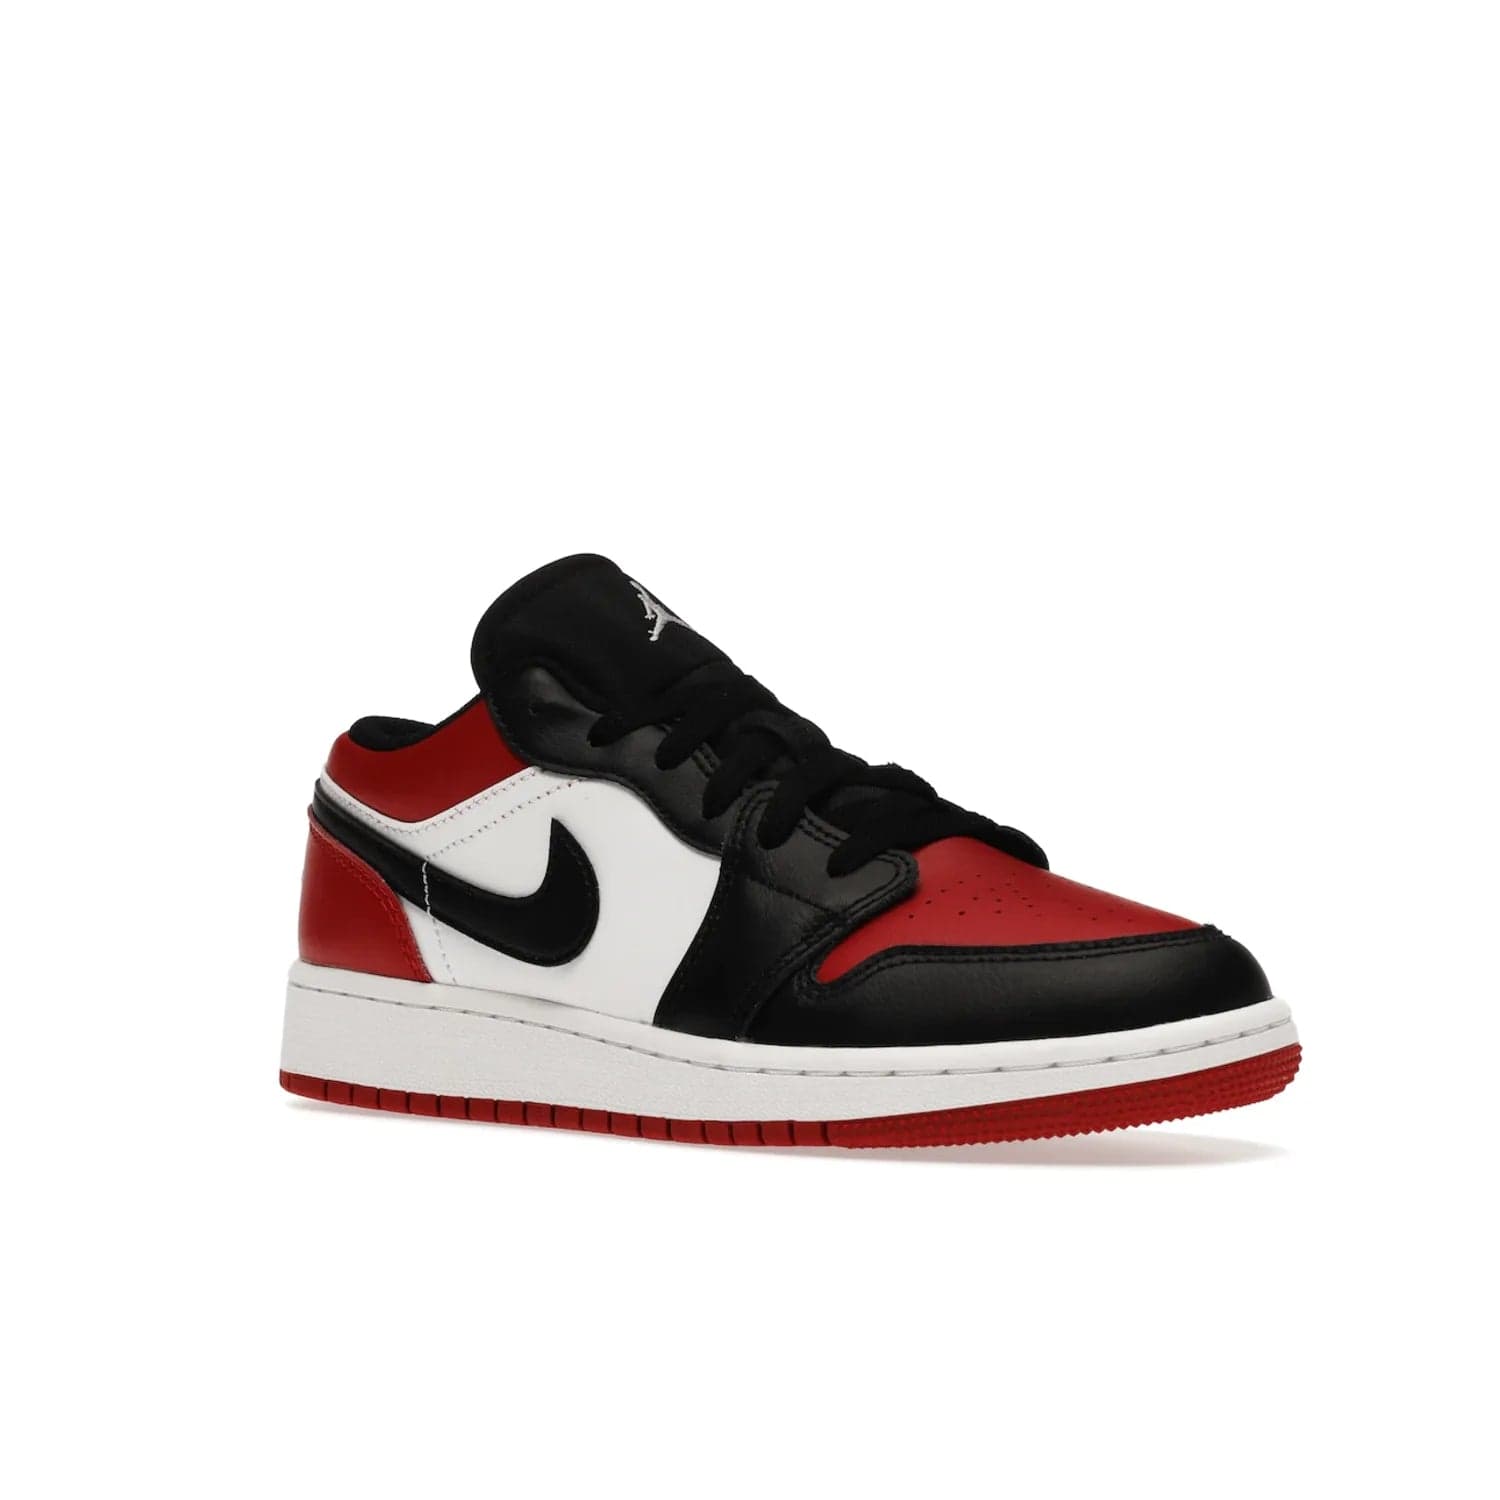 Jordan 1 Low Bred Toe (GS) - Image 5 - Only at www.BallersClubKickz.com - #
Iconic sneaker from Jordan brand with classic colorway, unique detailing & Air Jordan Wings logo. Step into the shoes of the greats with the Jordan 1 Low Bred Toe GS!